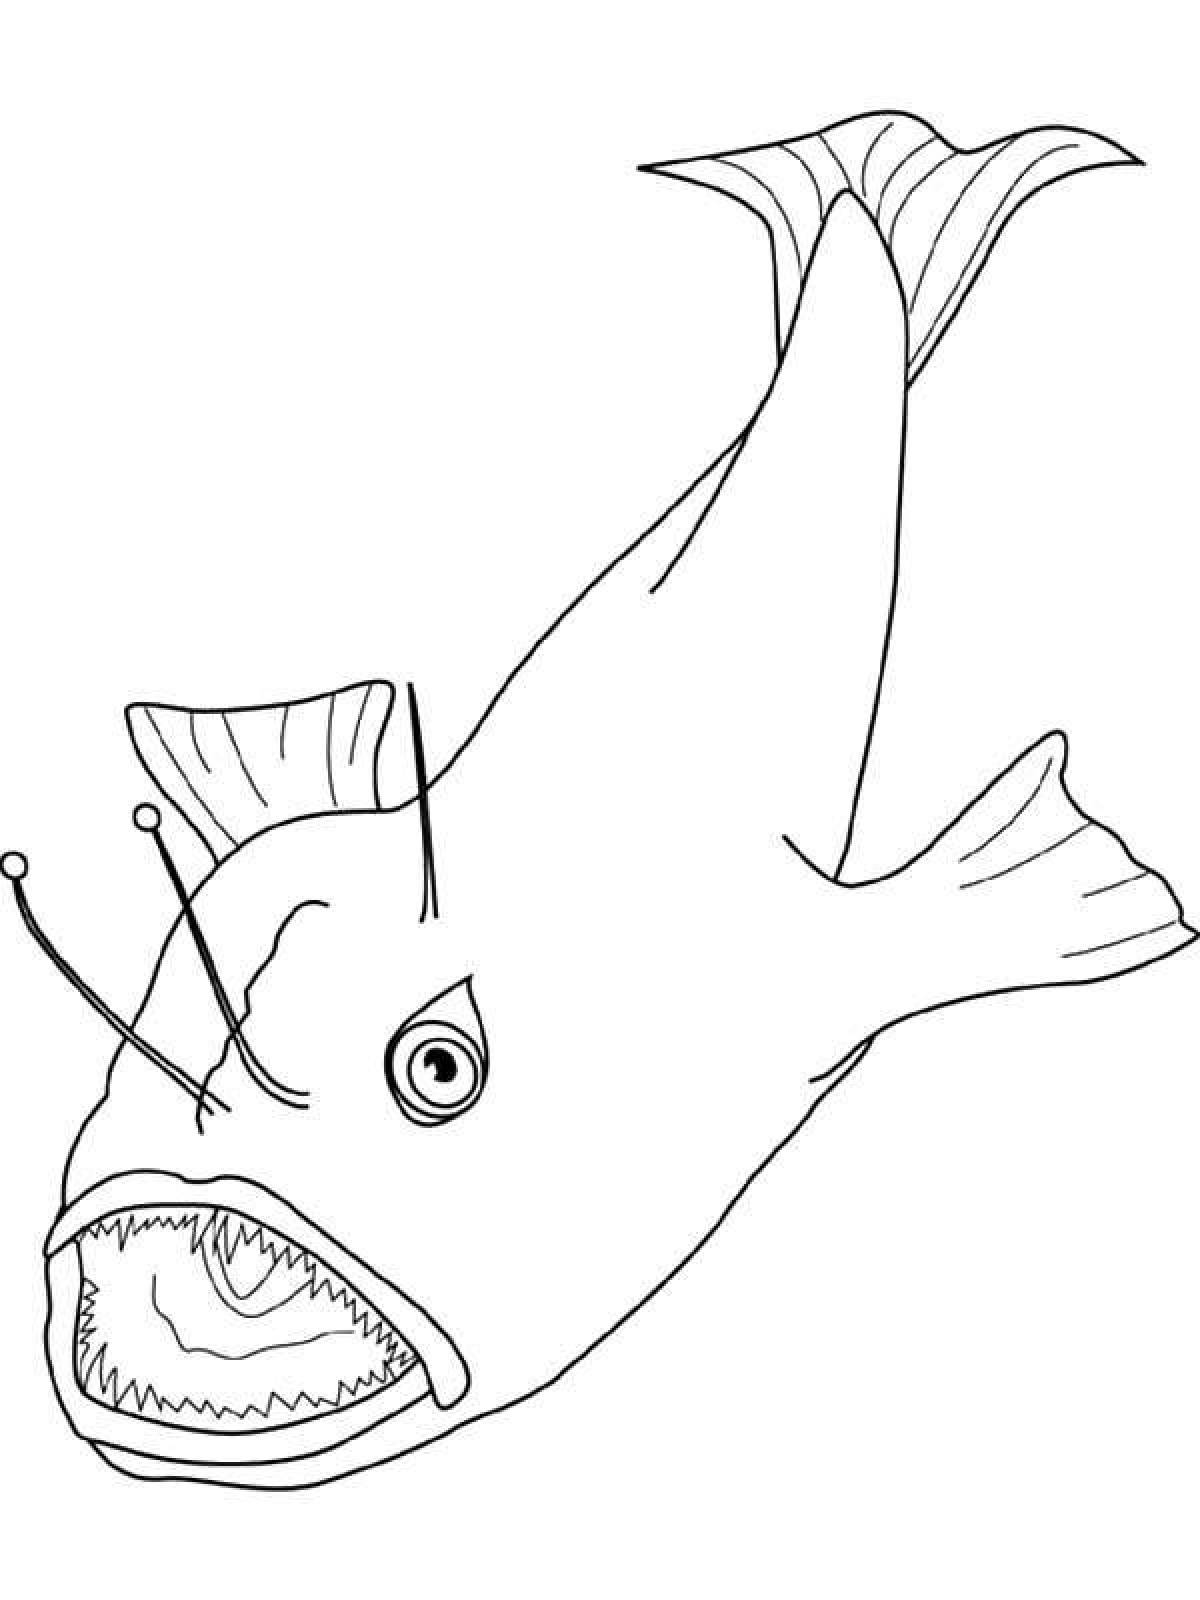 Coloring page happy angler